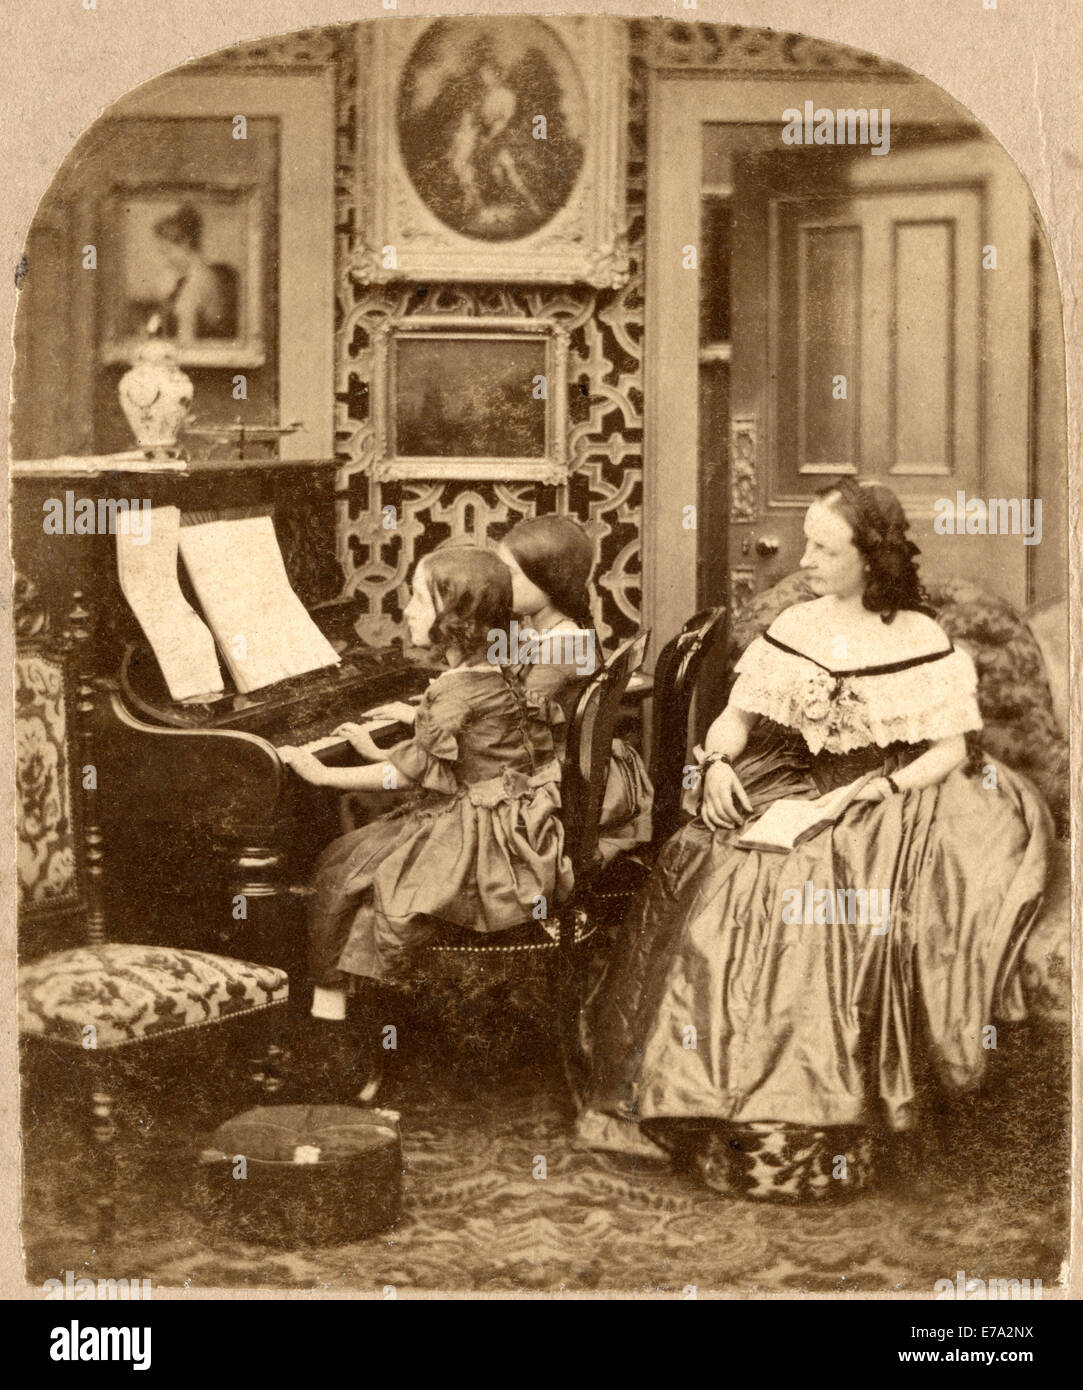 Seated Woman Behind Two Seated Girls Playing Piano, Evening Music, Single Image of Stereo Card, circa 1890 Stock Photo